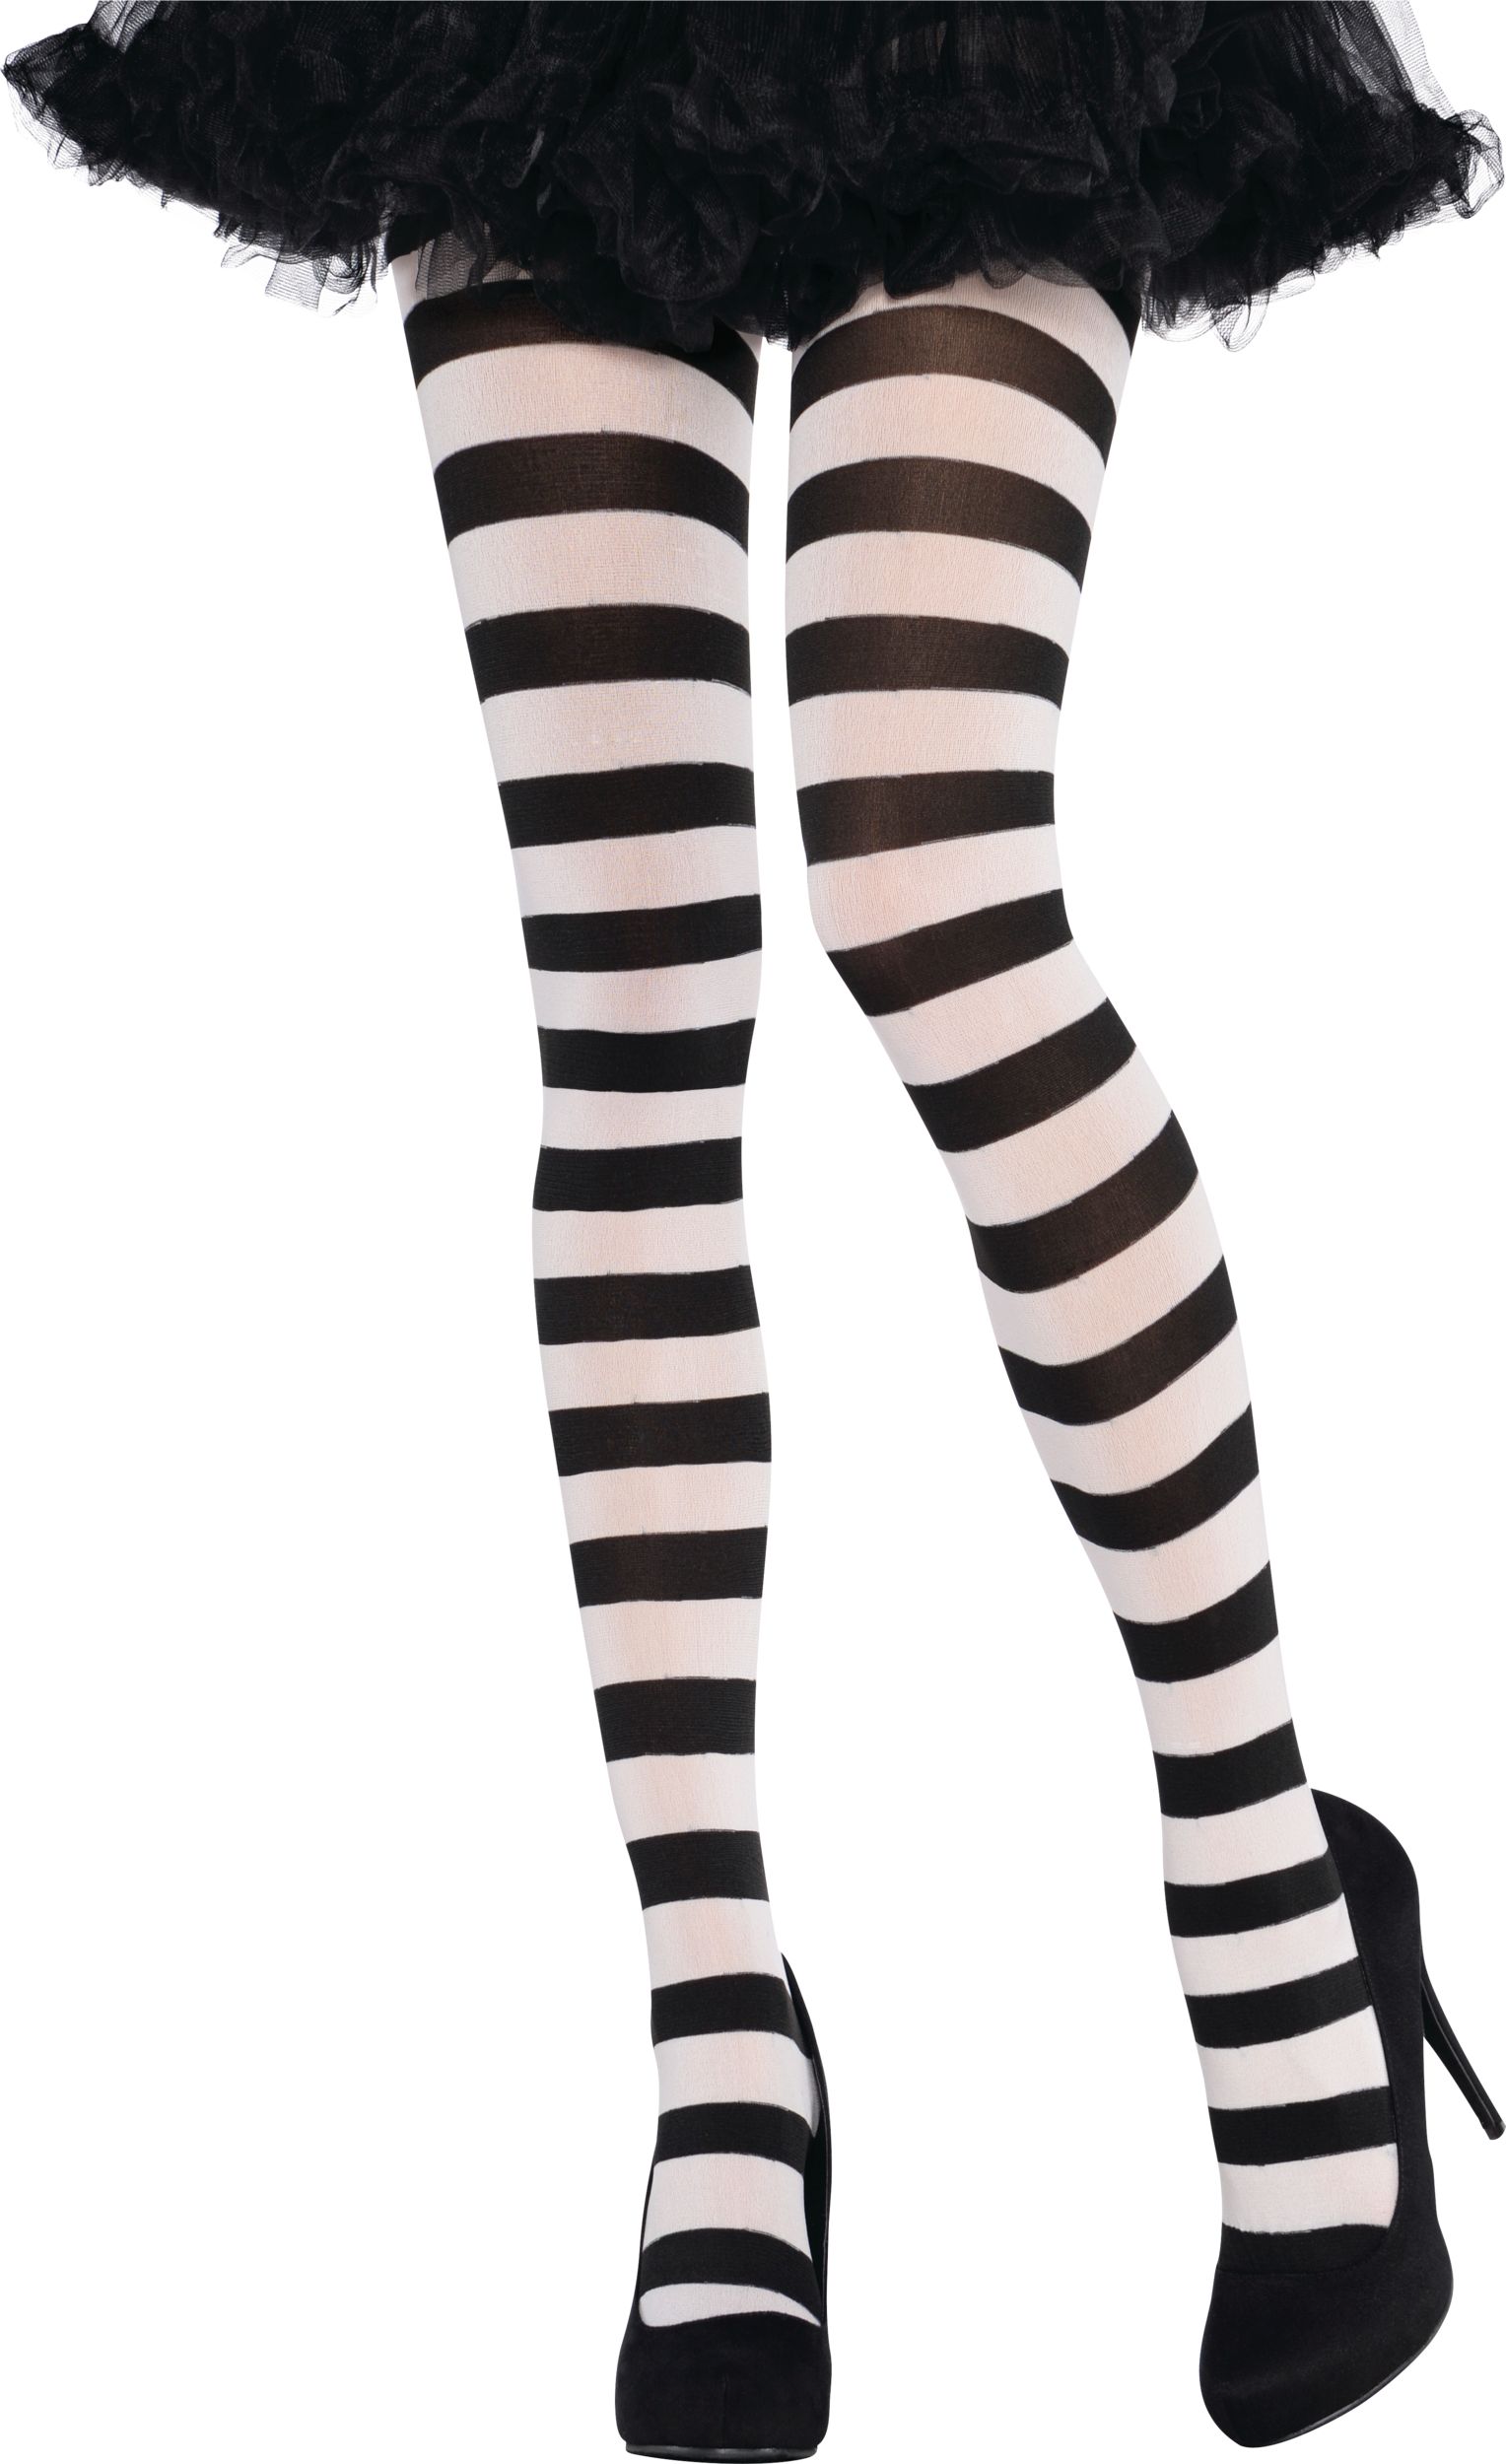 Black and White Tights - Tights - Hosiery - PartyWorld